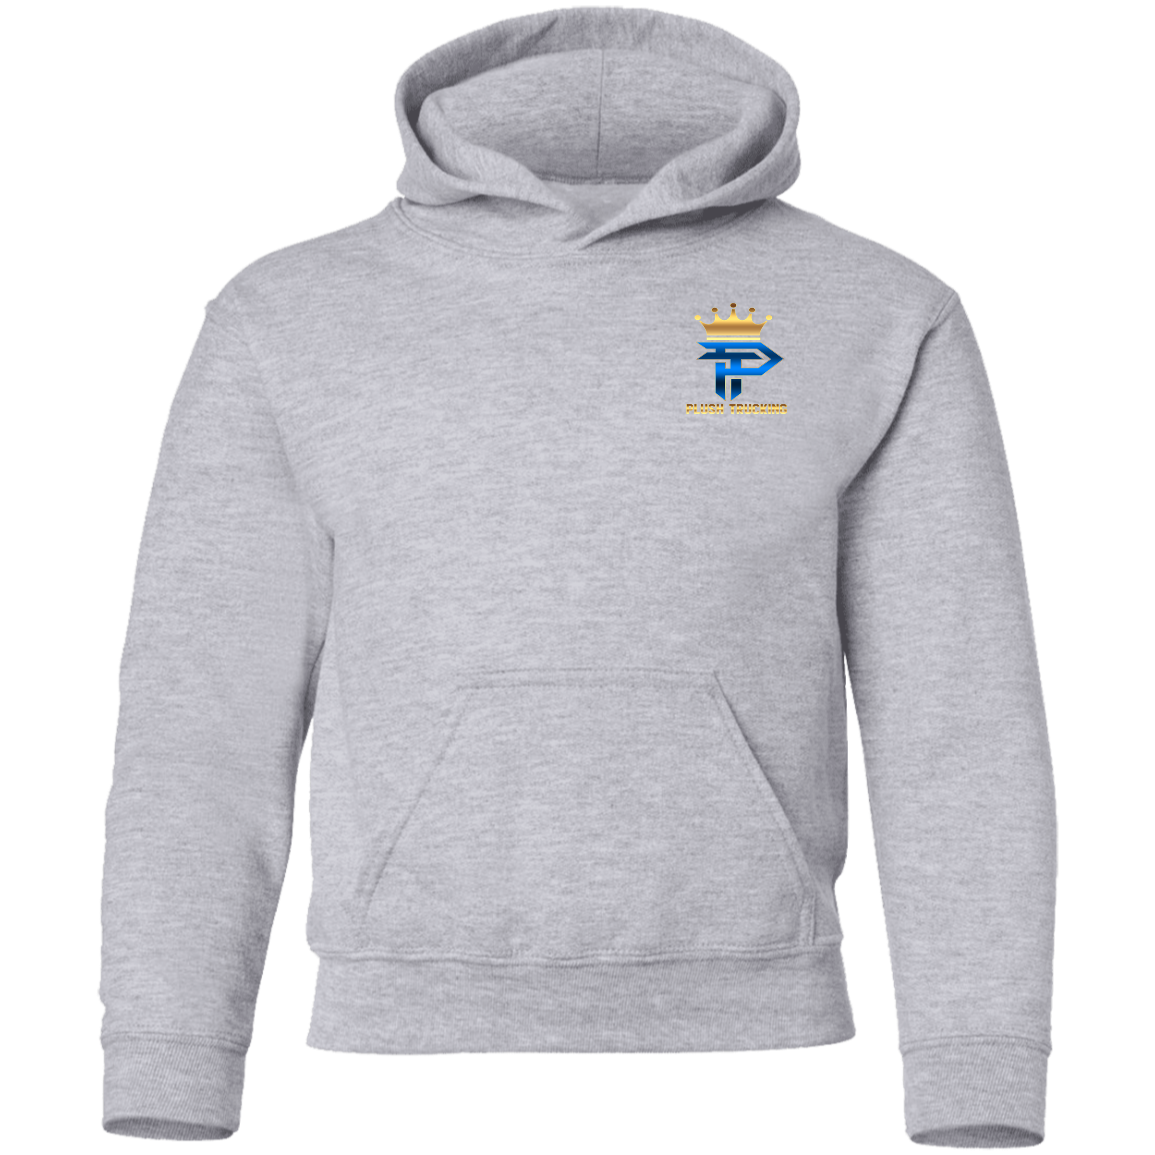 Trucking Hoodie for youth